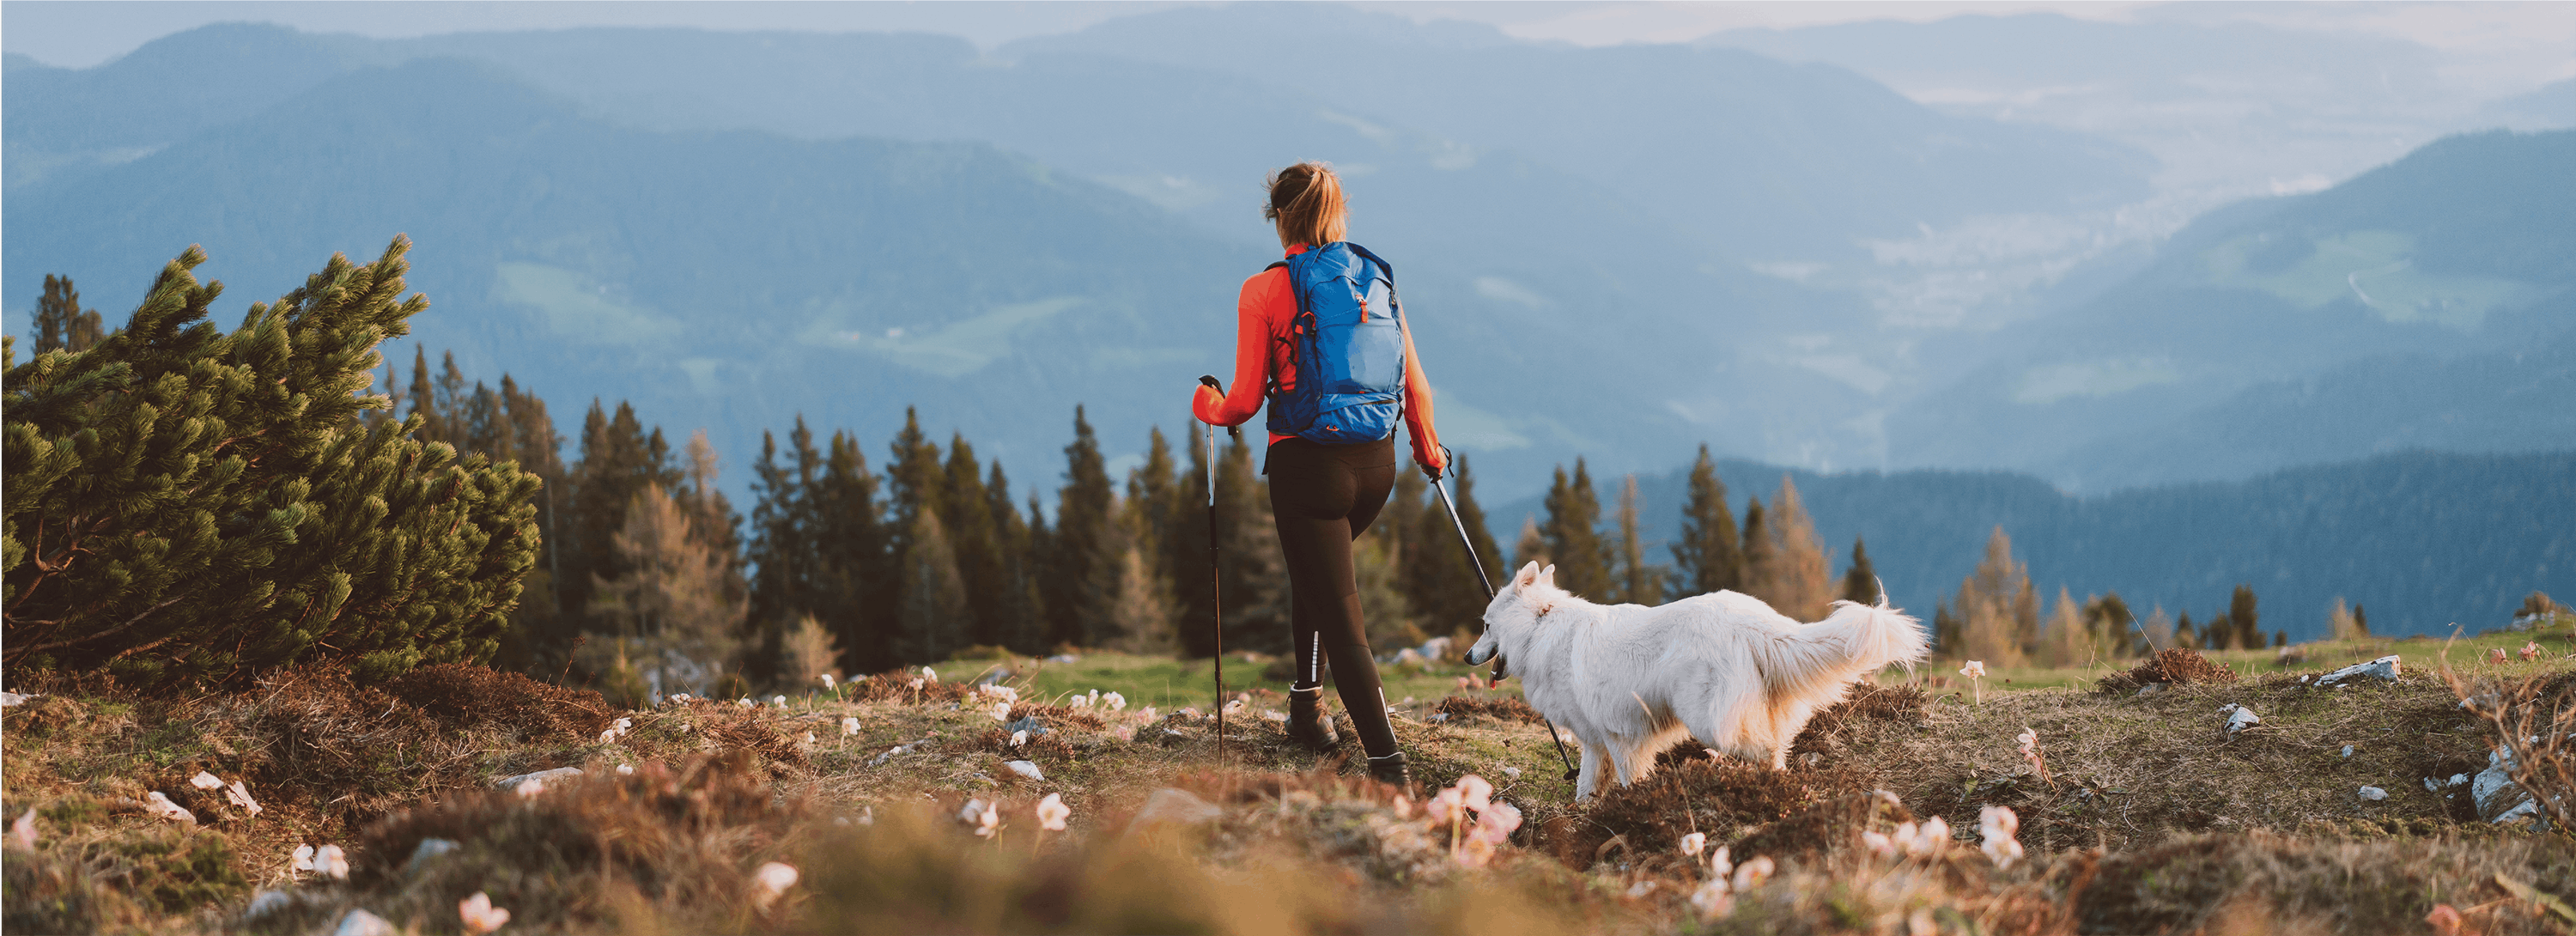 A woman leads her dog through a hike in the wilderness with trees and mountains in the background. 